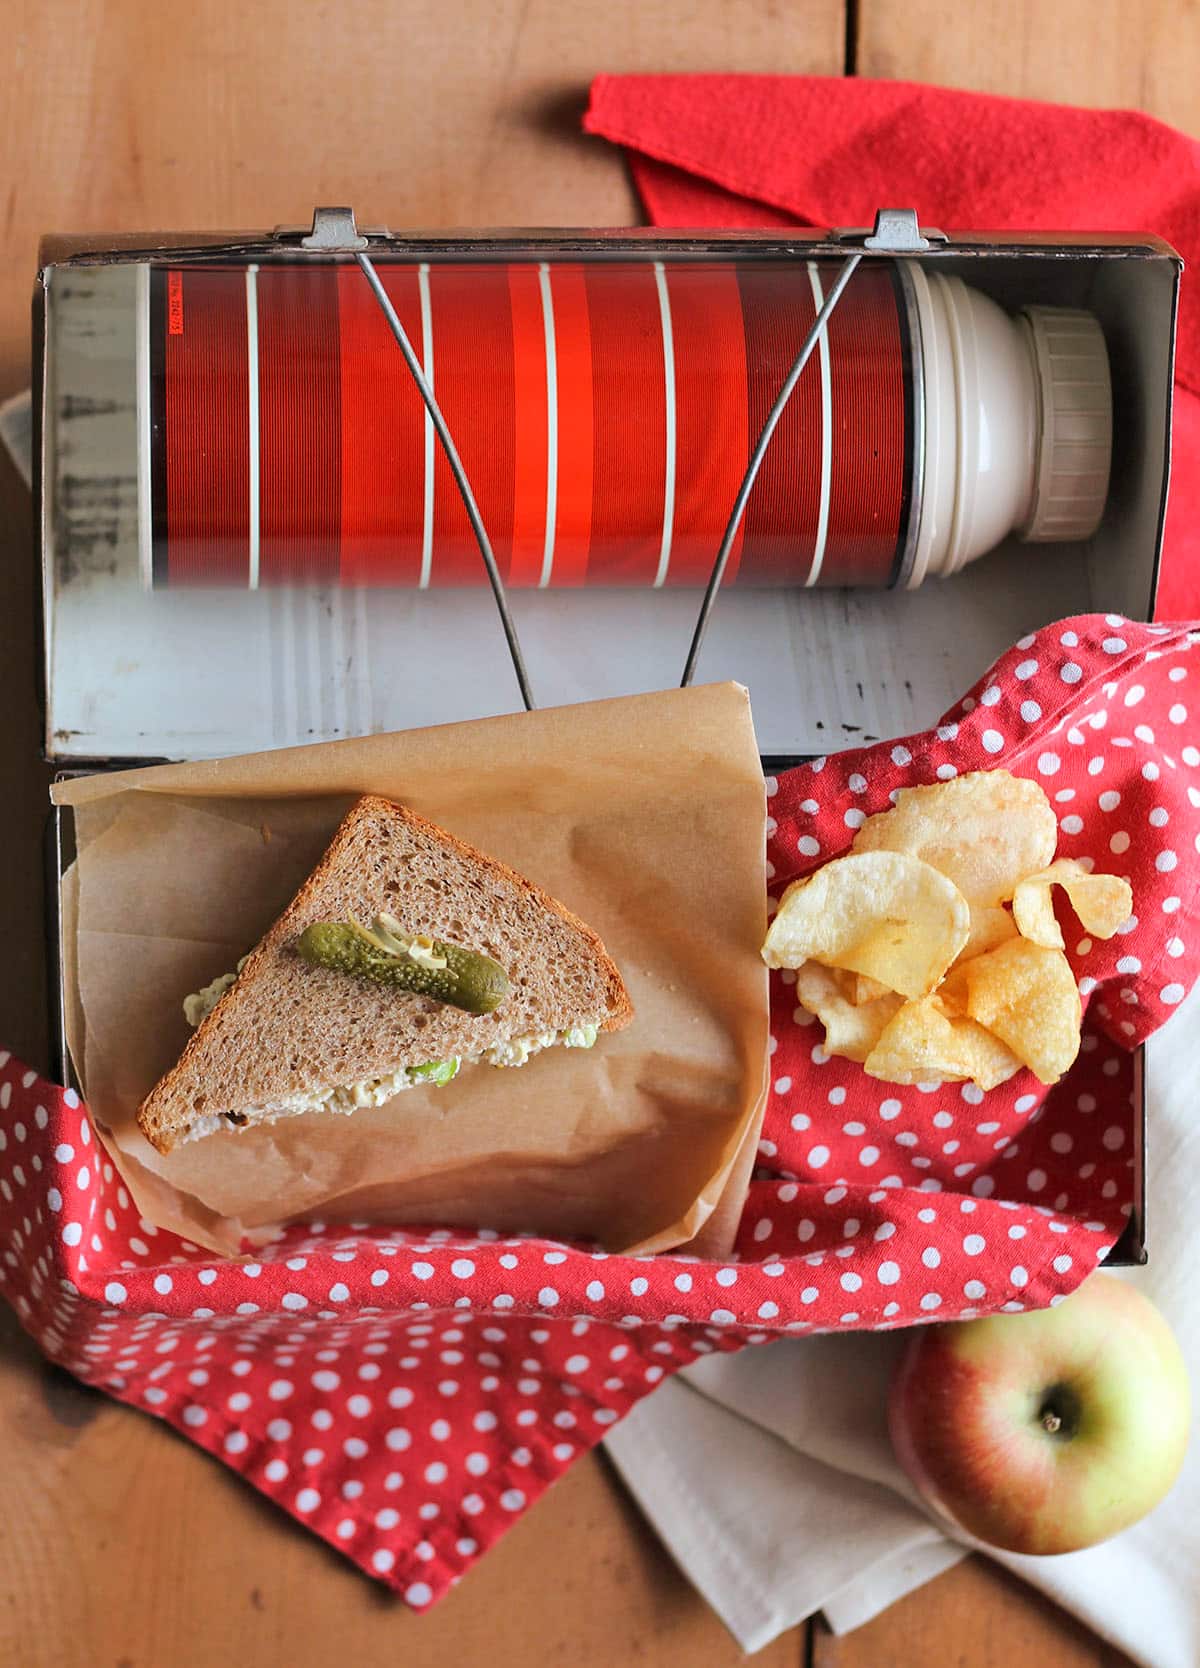 Lunchbox with thermos, apple, potato chips, and vegan egg salad sandwich.